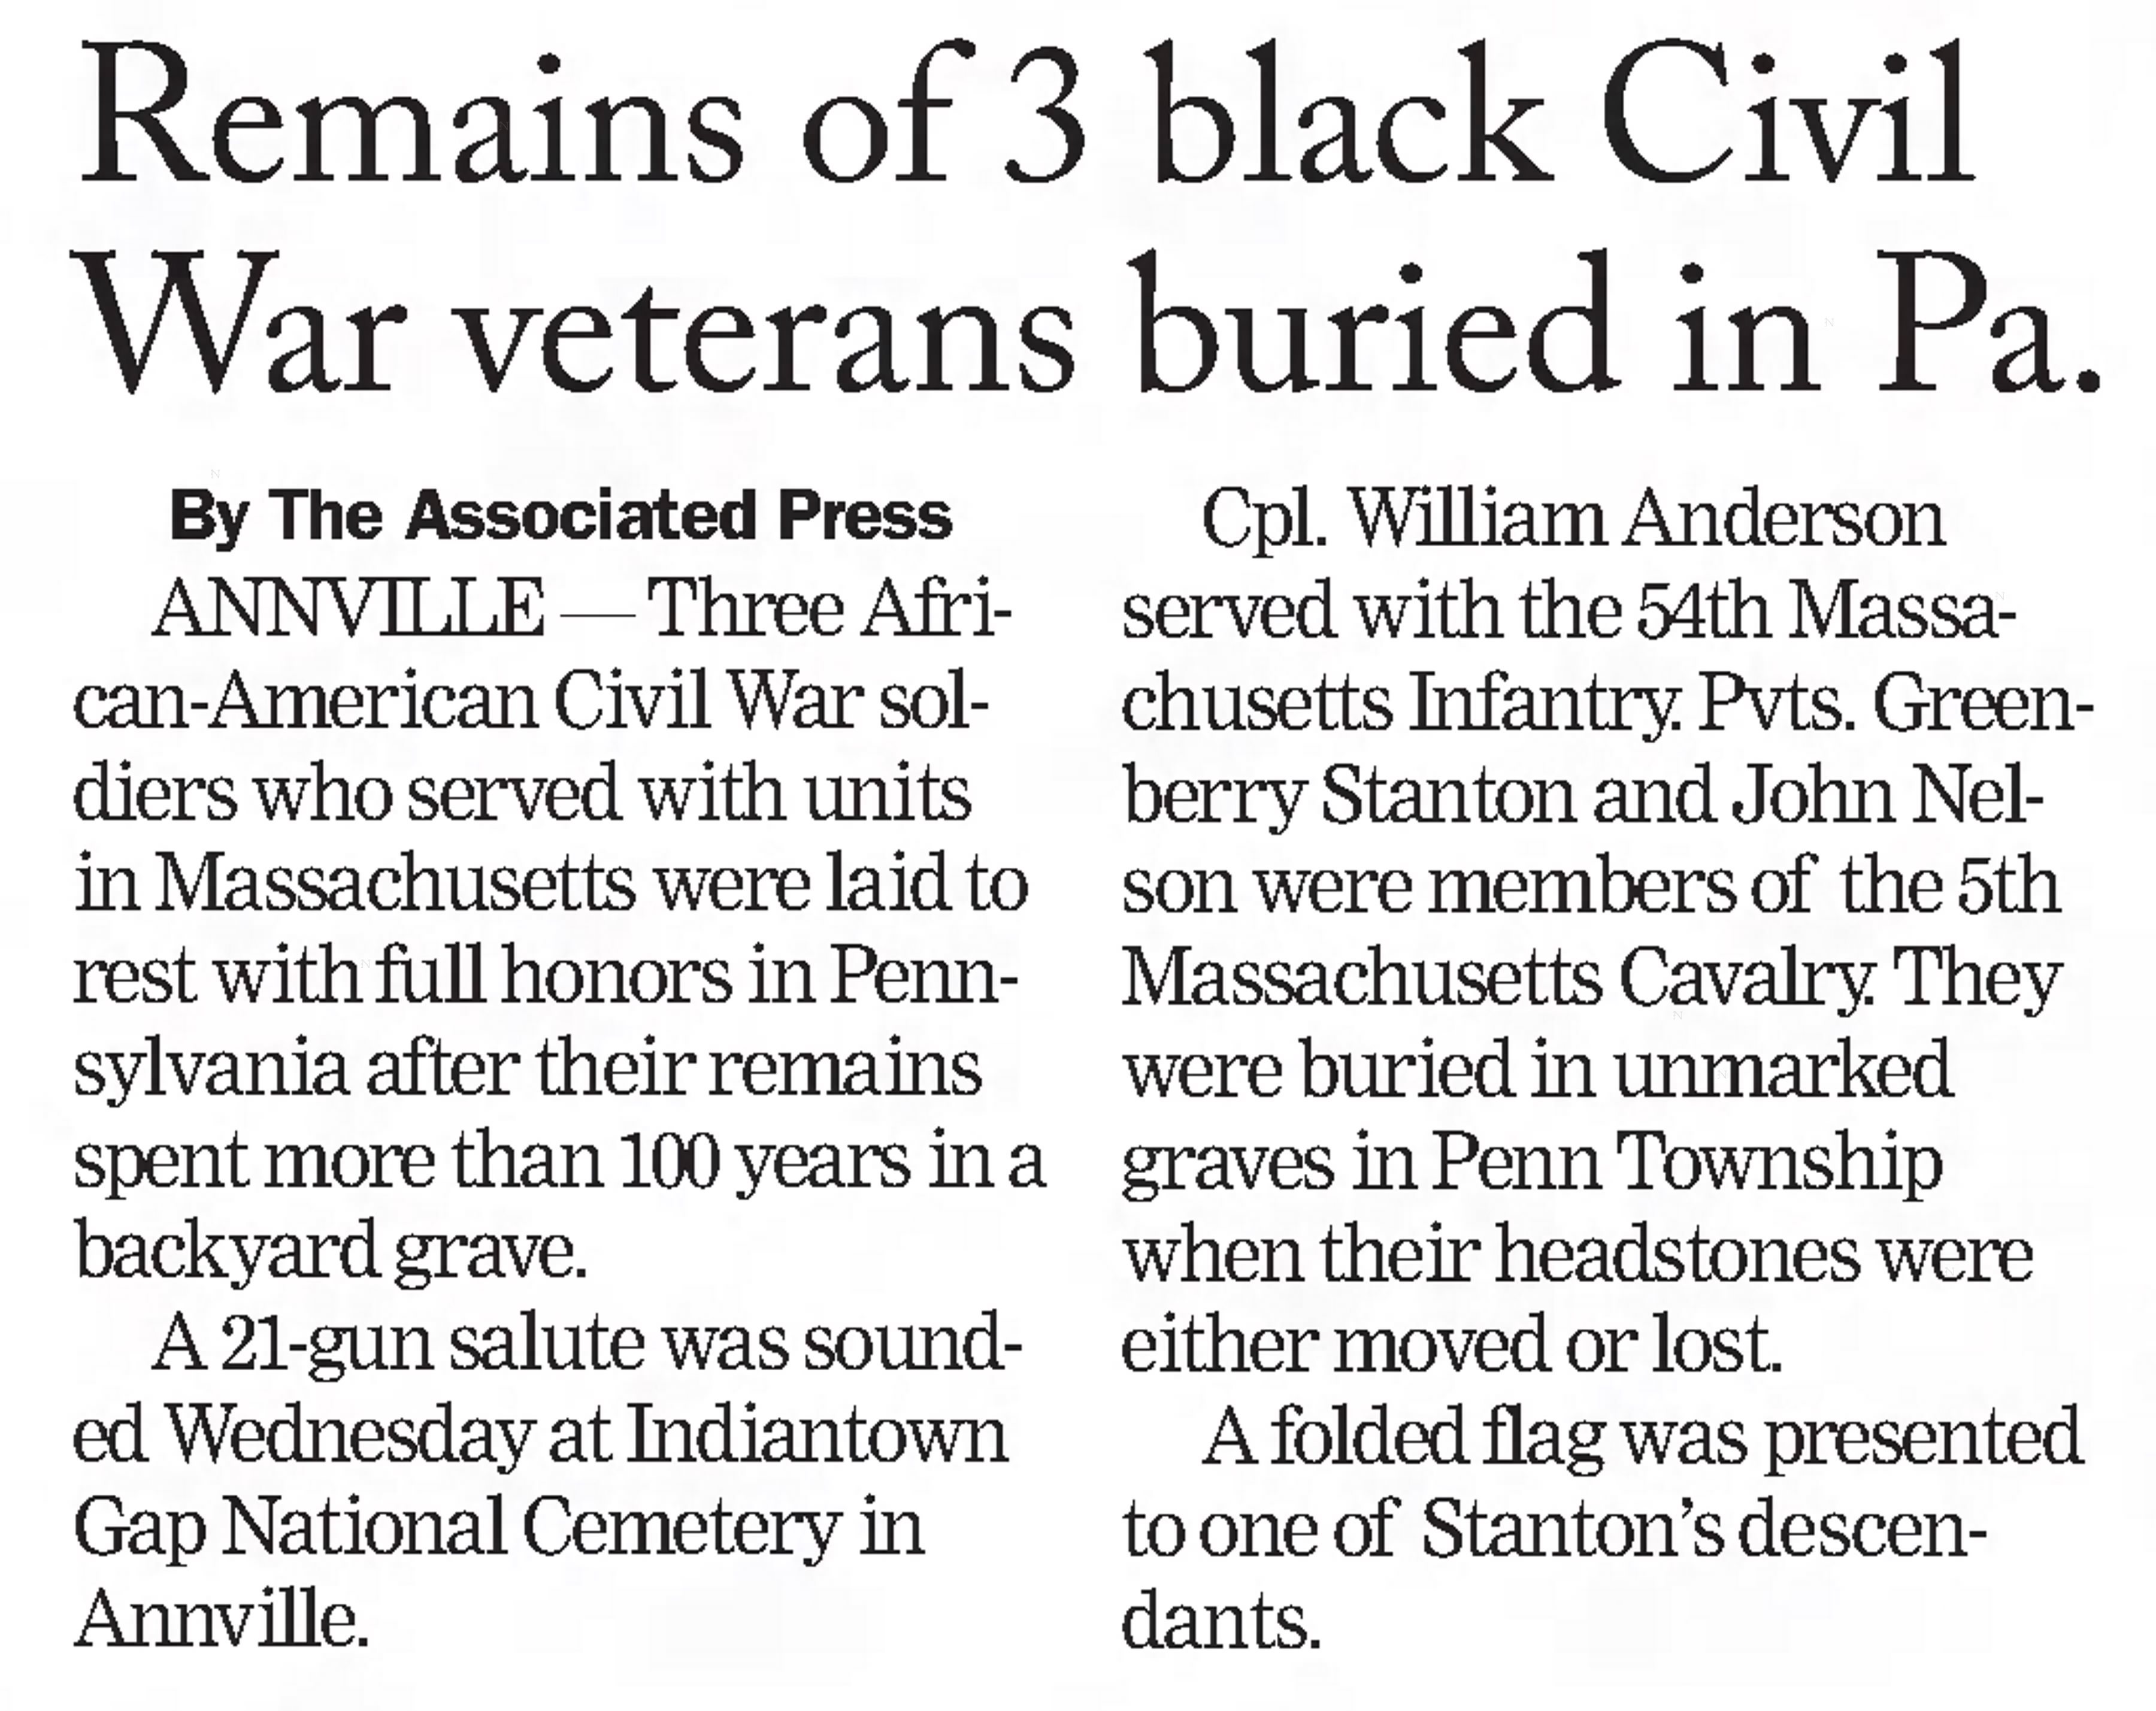 Article telling the story of three African-American Civil War veterans who have been exhumed and buried with honors at Indiantown Gap National Cemetery. 